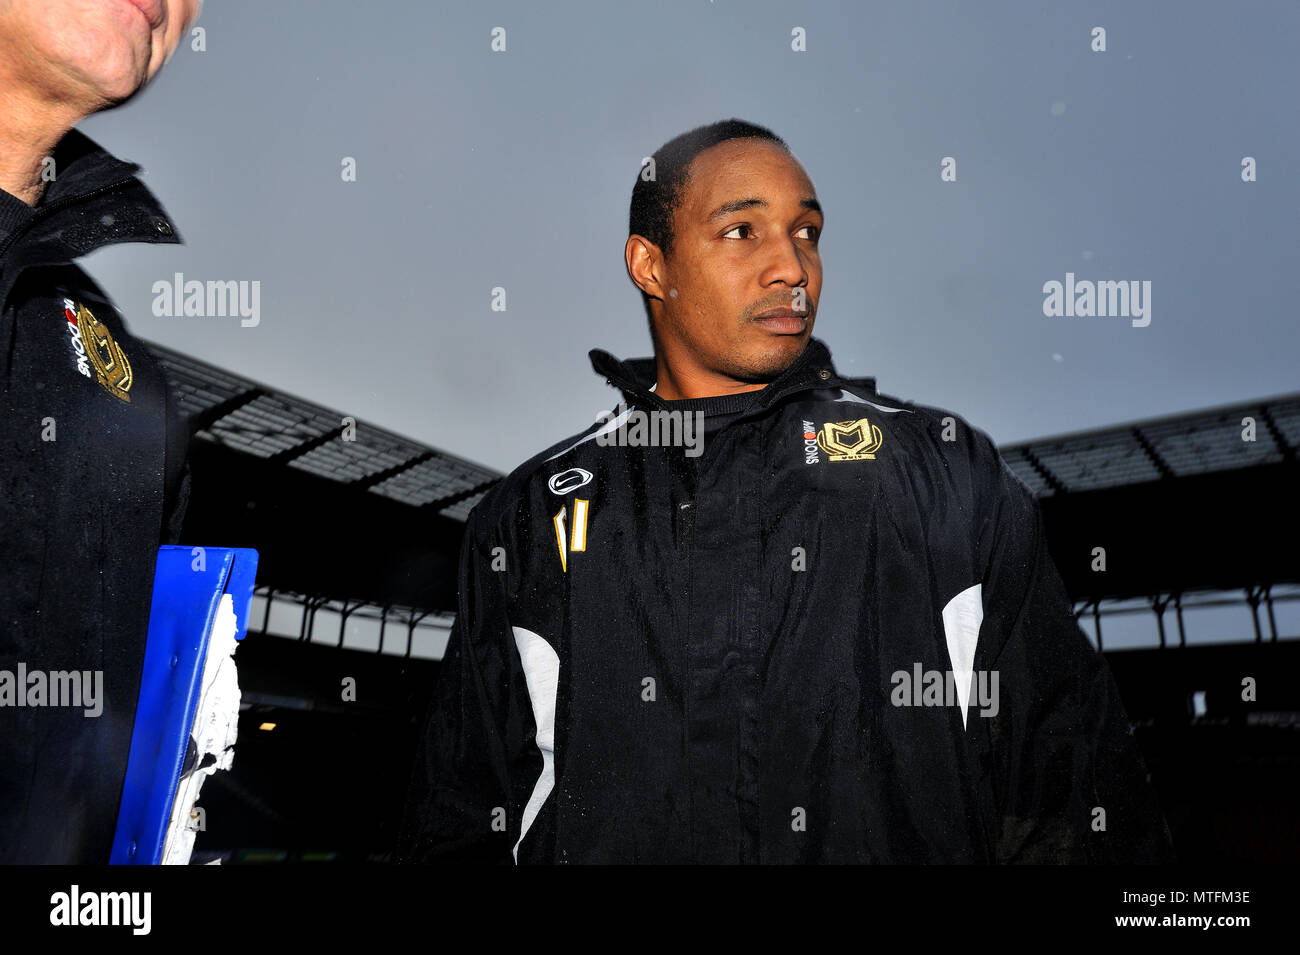 Paul Ince, Ex England, West Ham United, Manchester United, Inter Milan and Liverpool soccer player, photographed here during his management career at MK Dons. Stock Photo